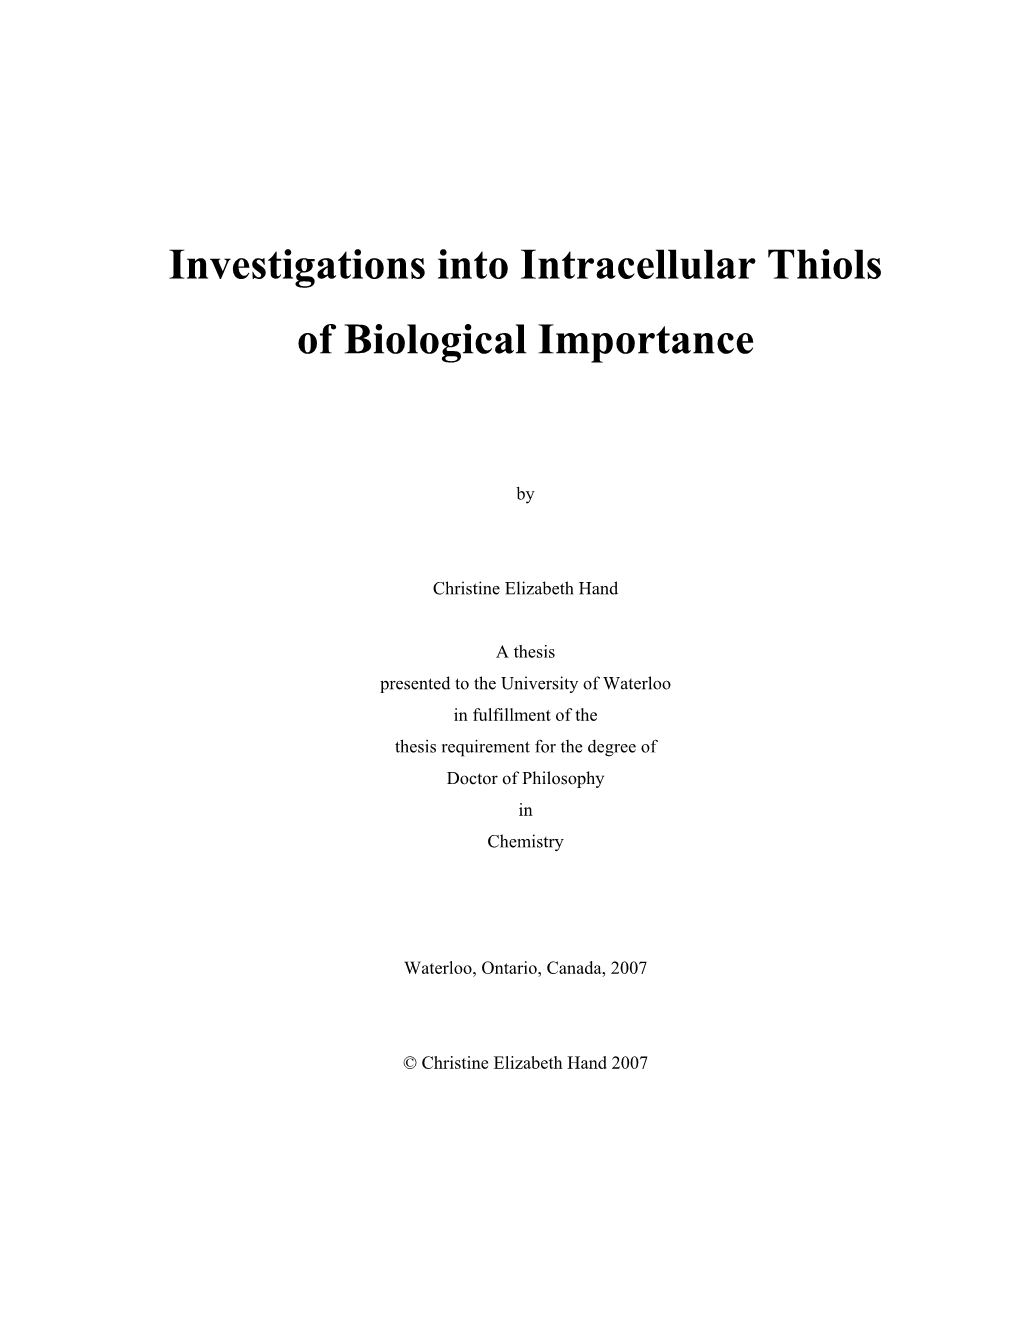 Investigations Into Intracellular Thiols of Biological Importance